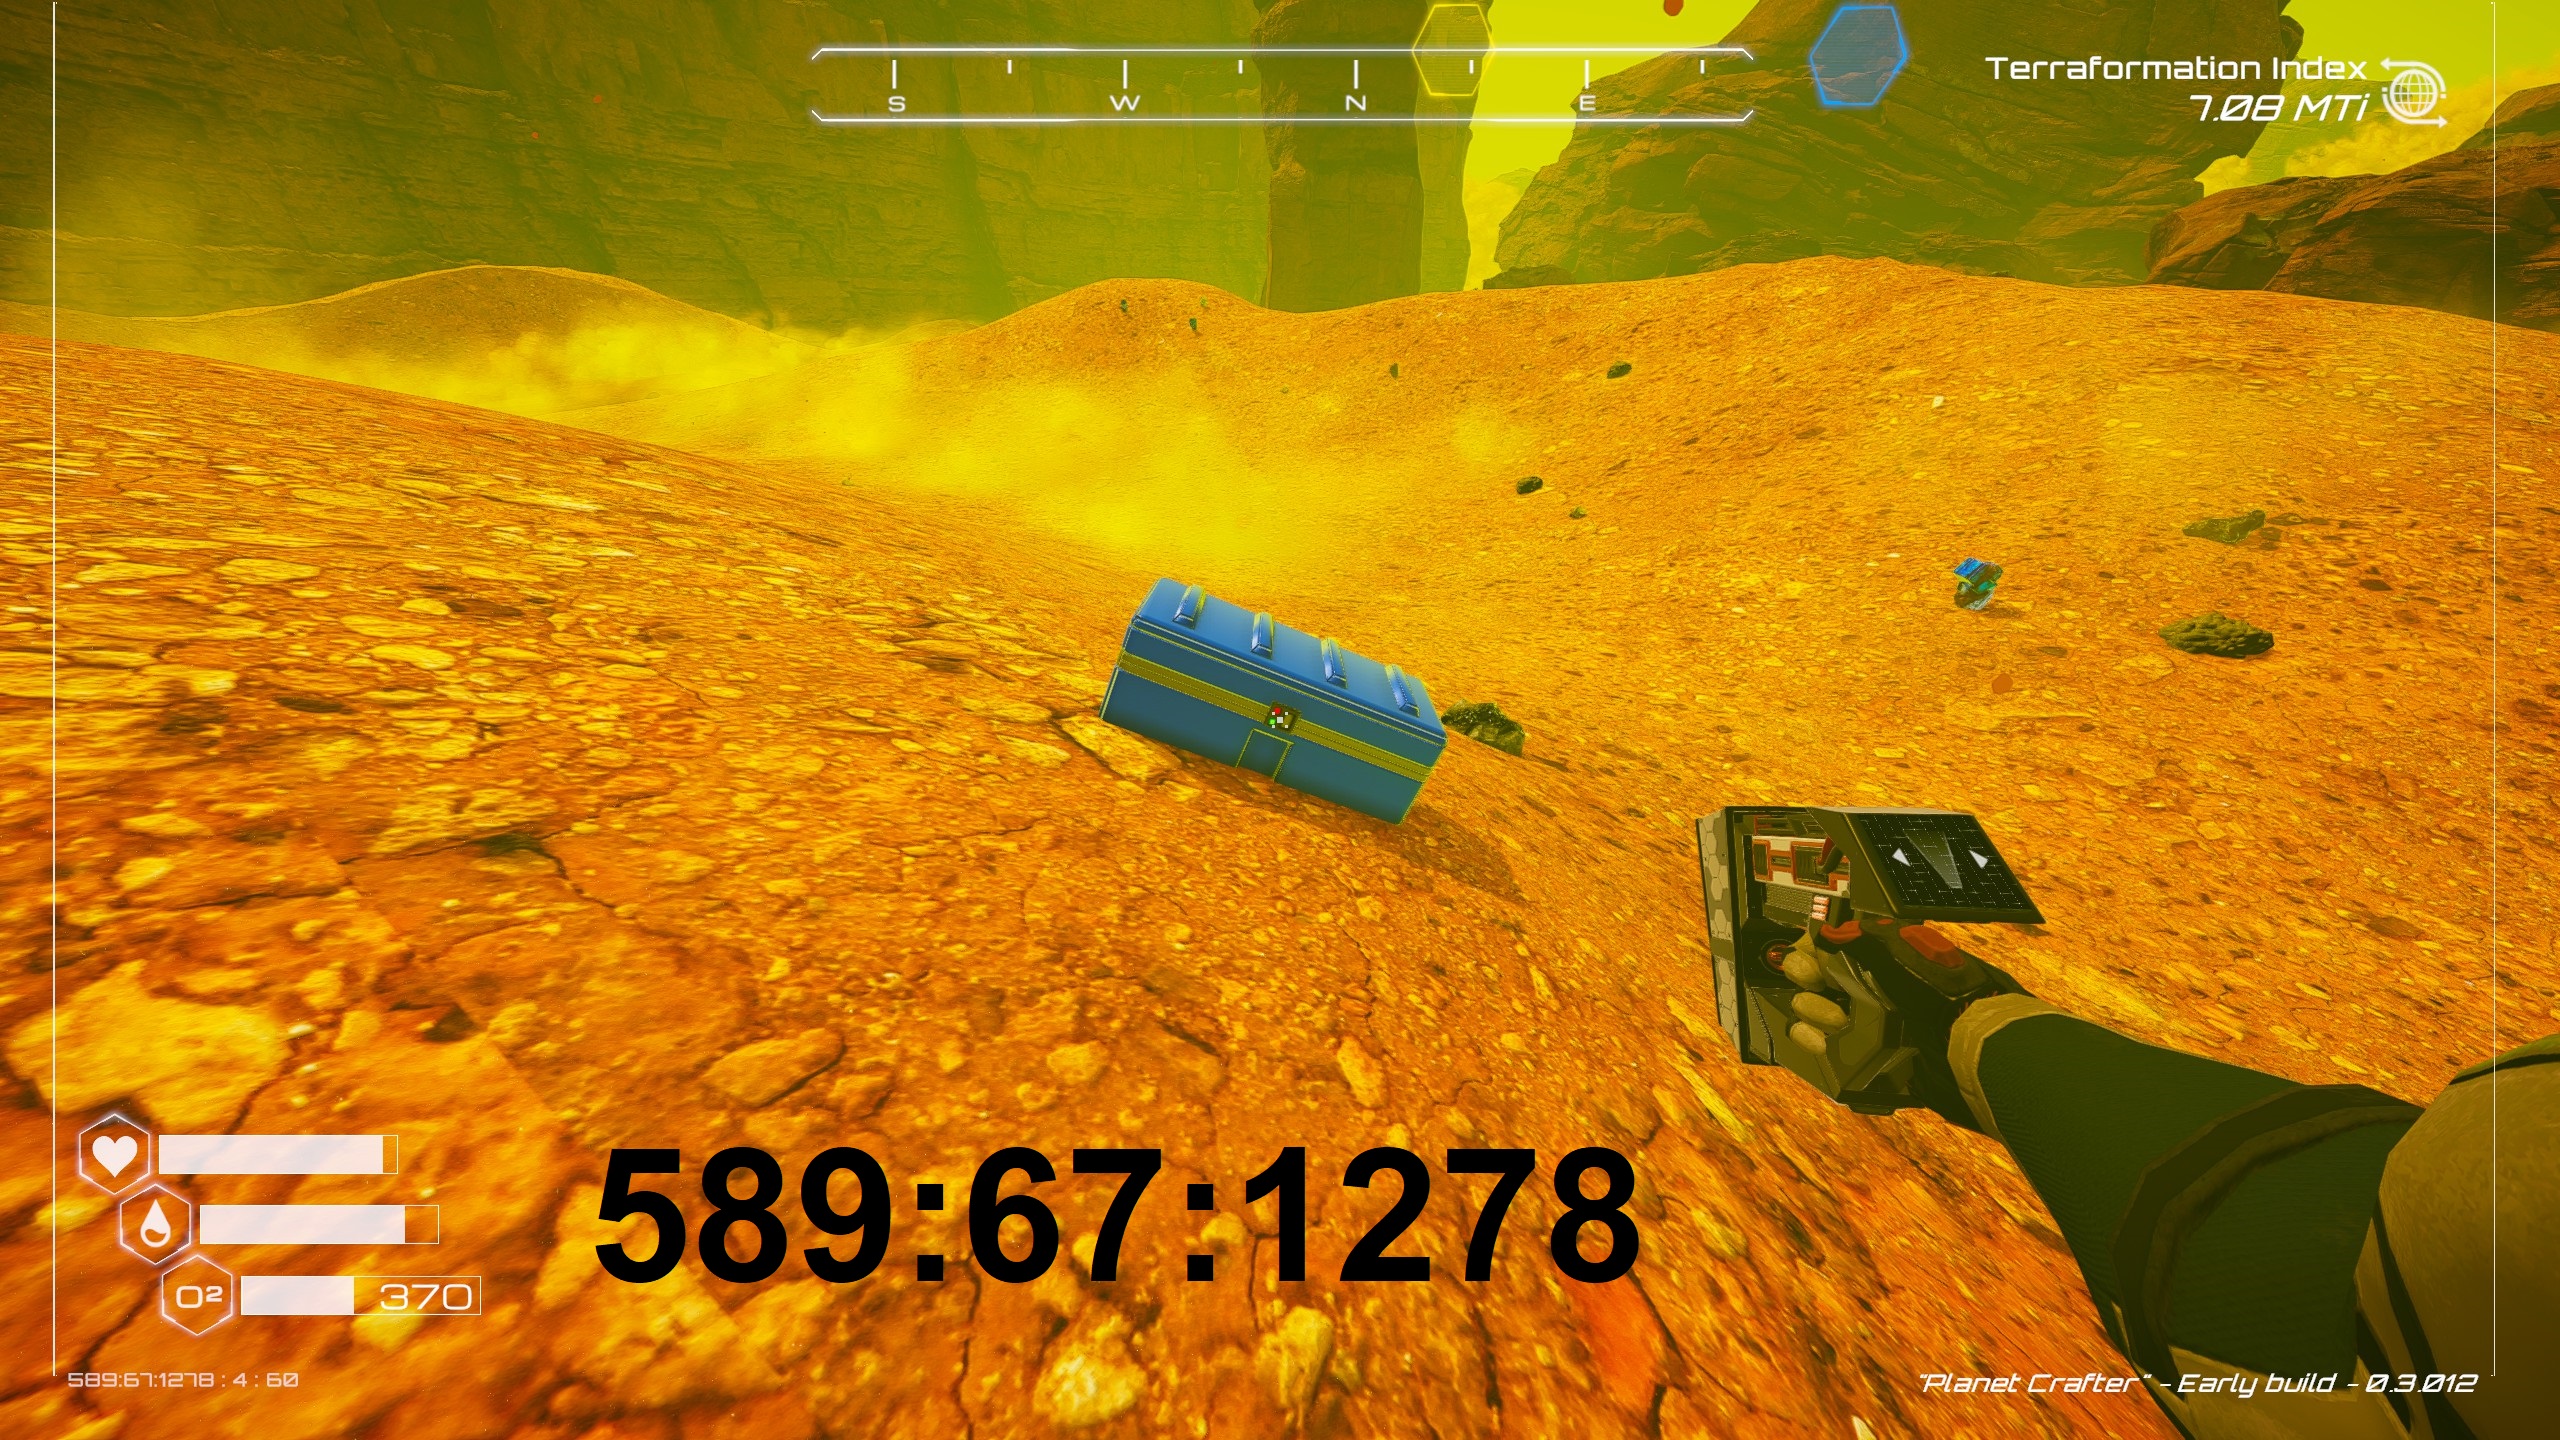 How to find all gold and blue chests in The Planet Crafter. Map of